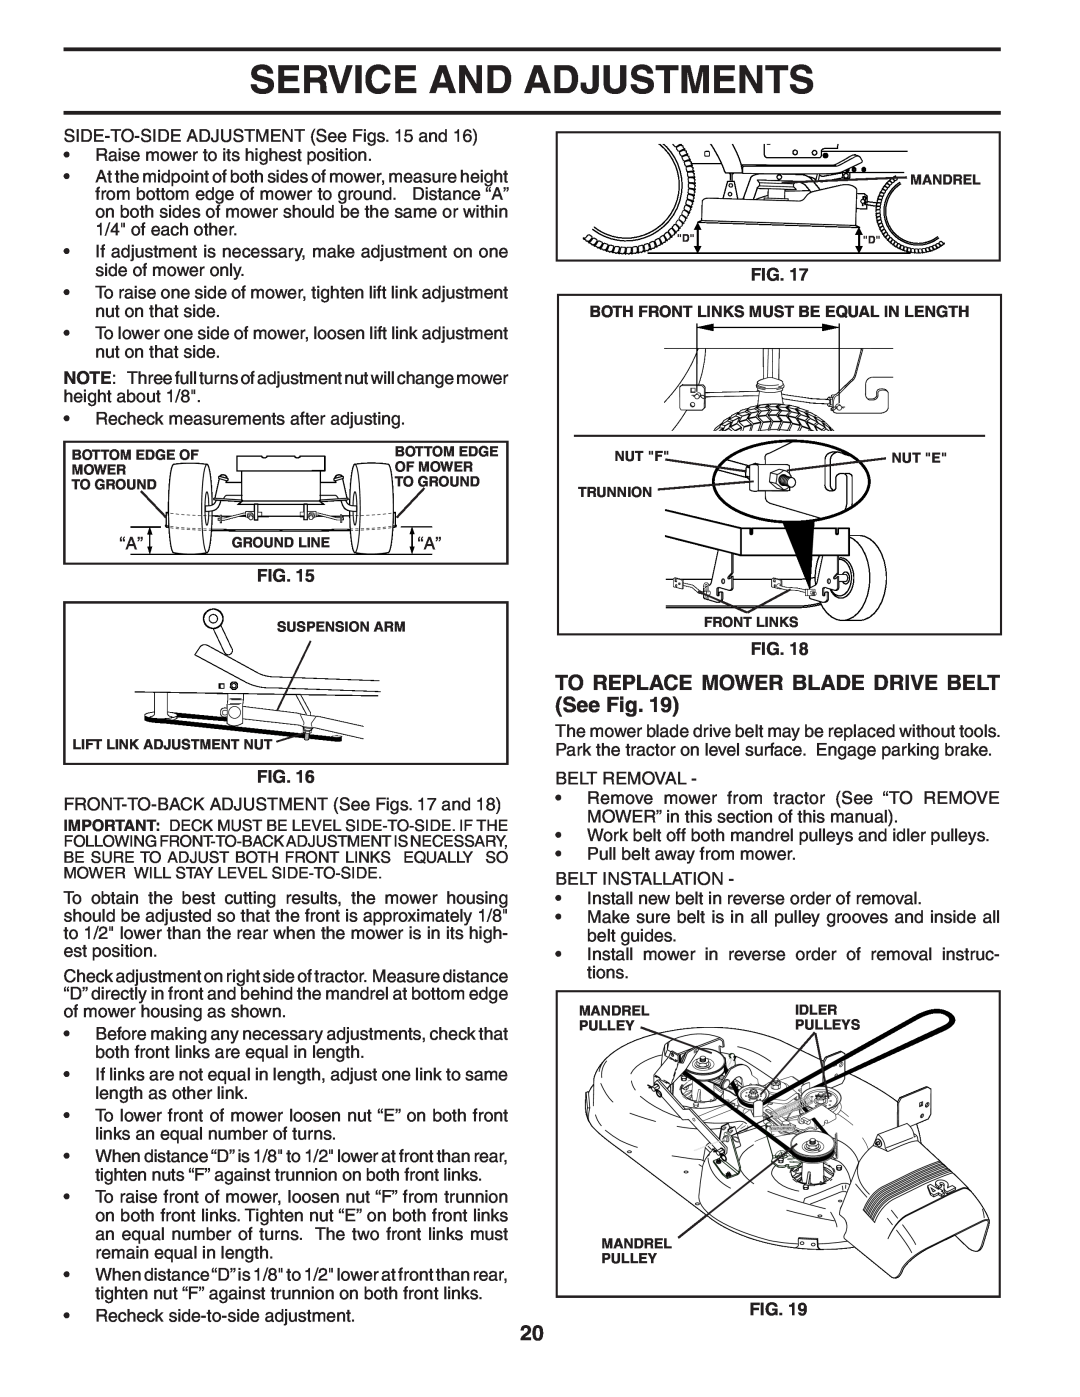 Poulan 403444 manual TO REPLACE MOWER BLADE DRIVE BELT See Fig, Service And Adjustments 